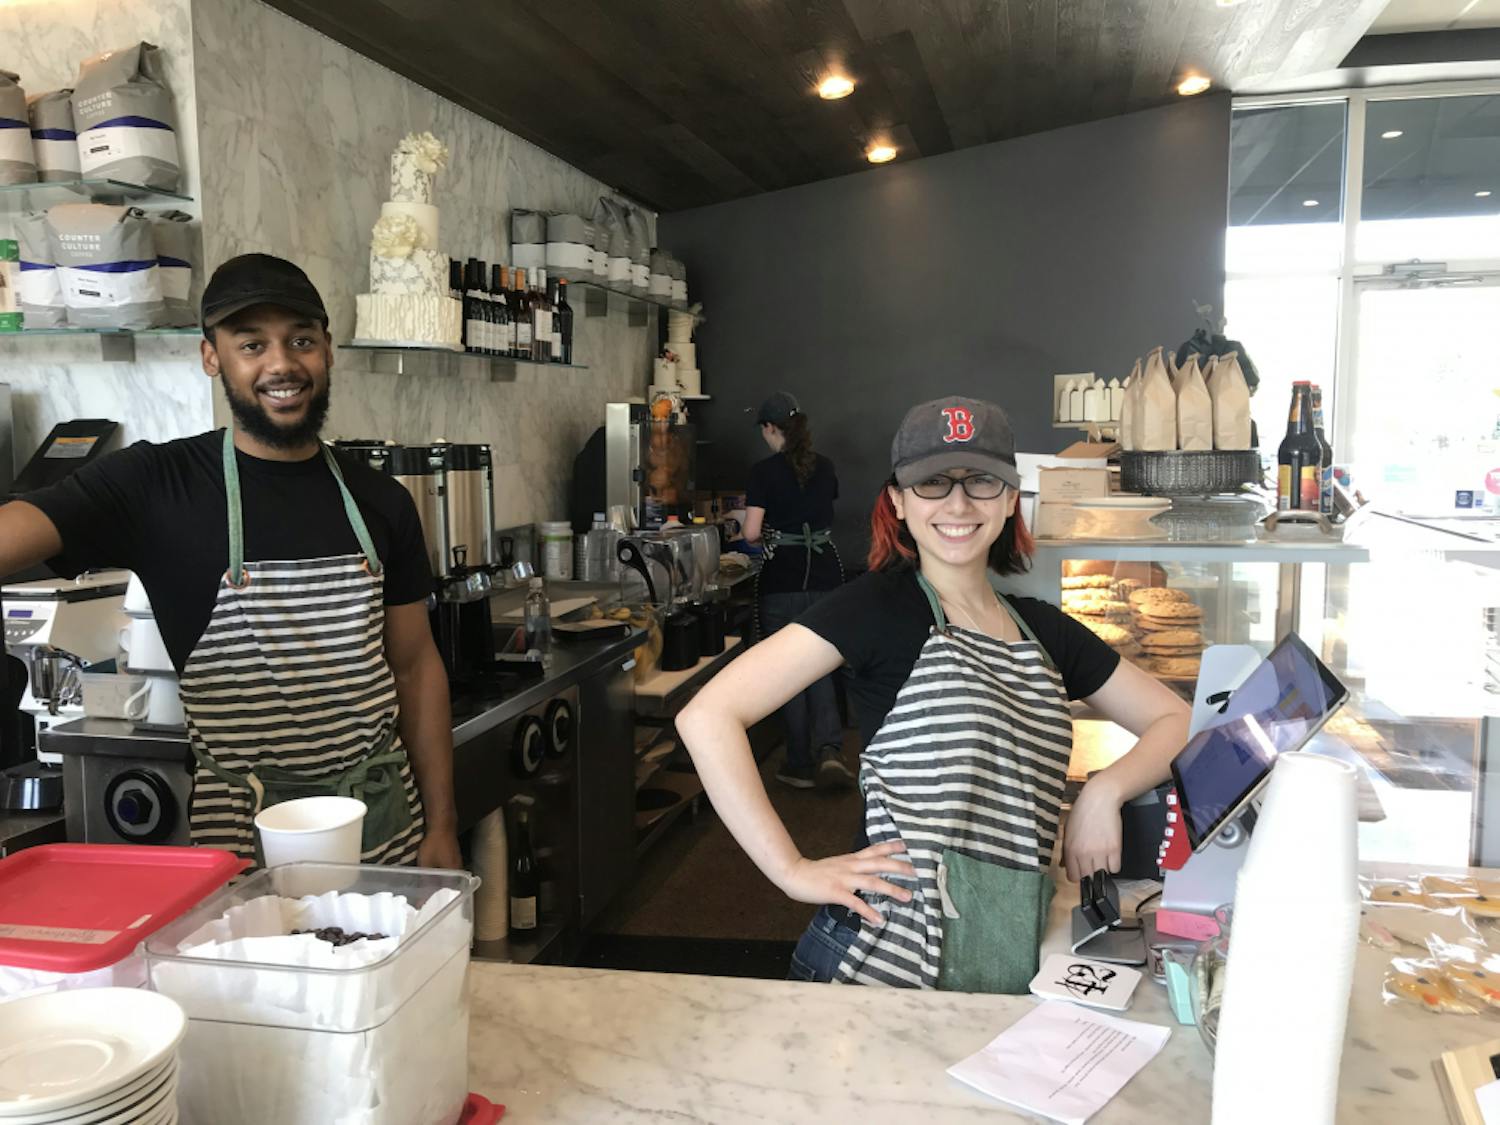 Michael Teasley (left) and Deb Aronin (right), both employees of Mad Hatter's Cafe and Bakeshop in Durham, say their job is to deliver smiles to all the customers. Mad Hatter's is expanding to Chapel Hill and hopes to open a new location on South Campus during the summer of 2019.